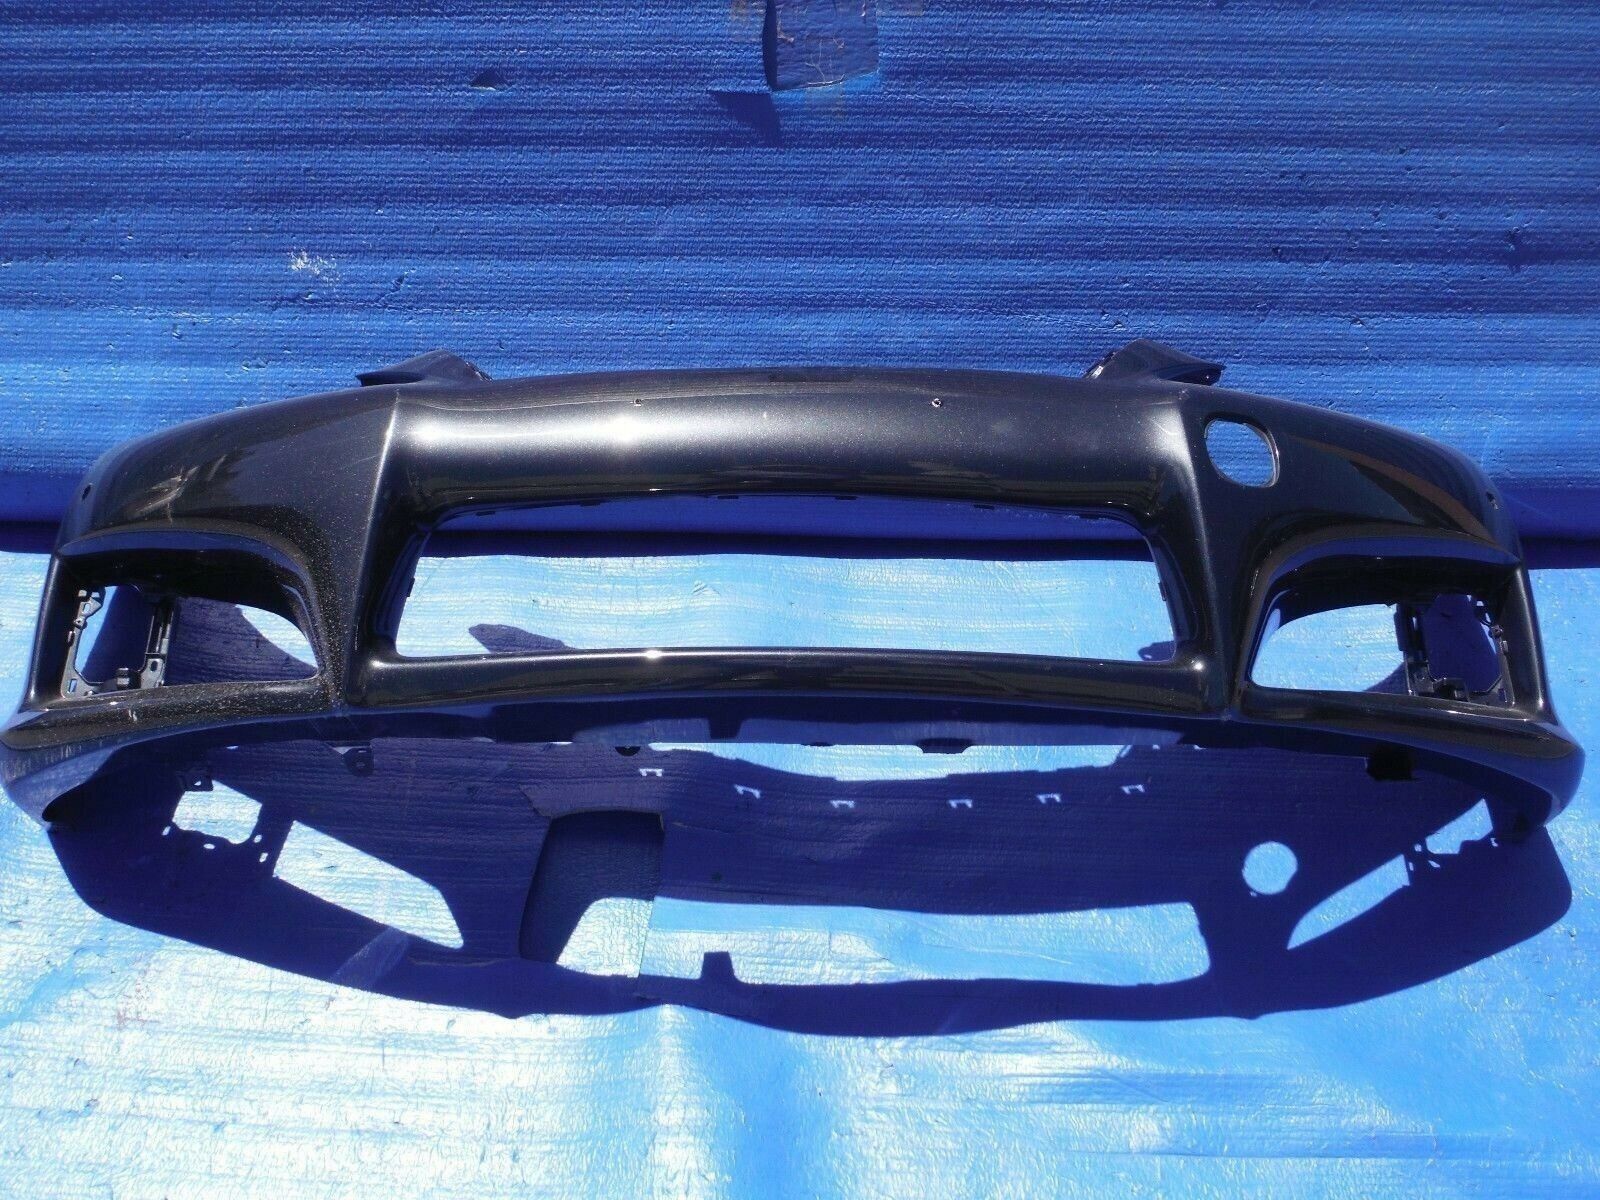 08 09 10 11 12 13 2010 2011 2012 2013 LEXUS ISF IS F FRONT BUMPER COVER OEM